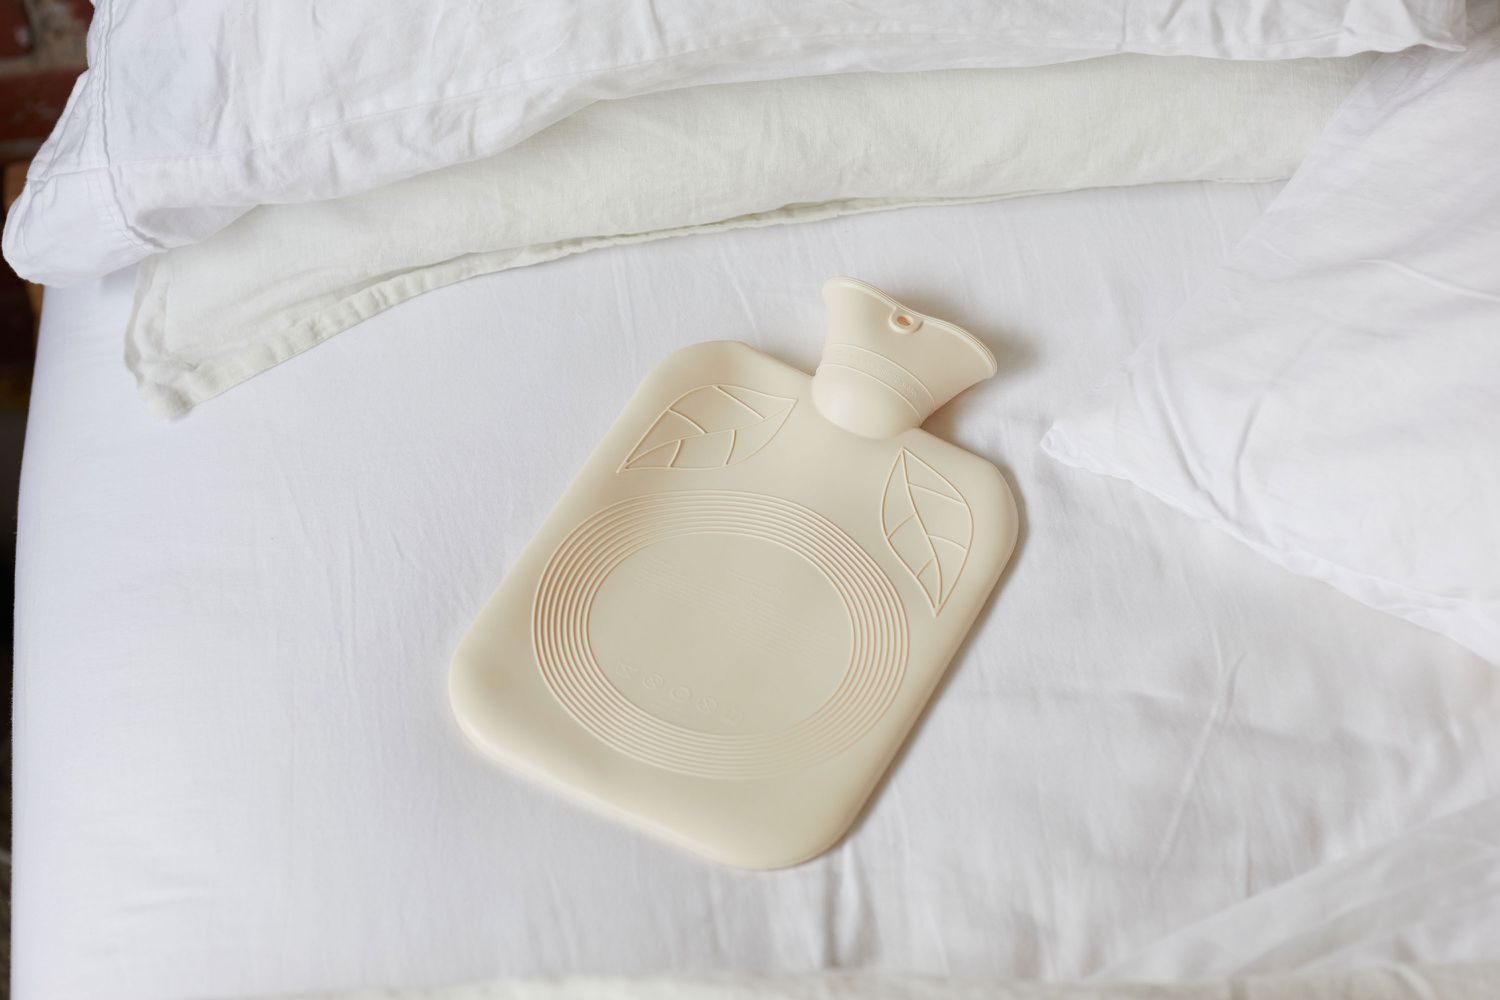 Tan-colored hot water bottle filled with cool water and placed on bed